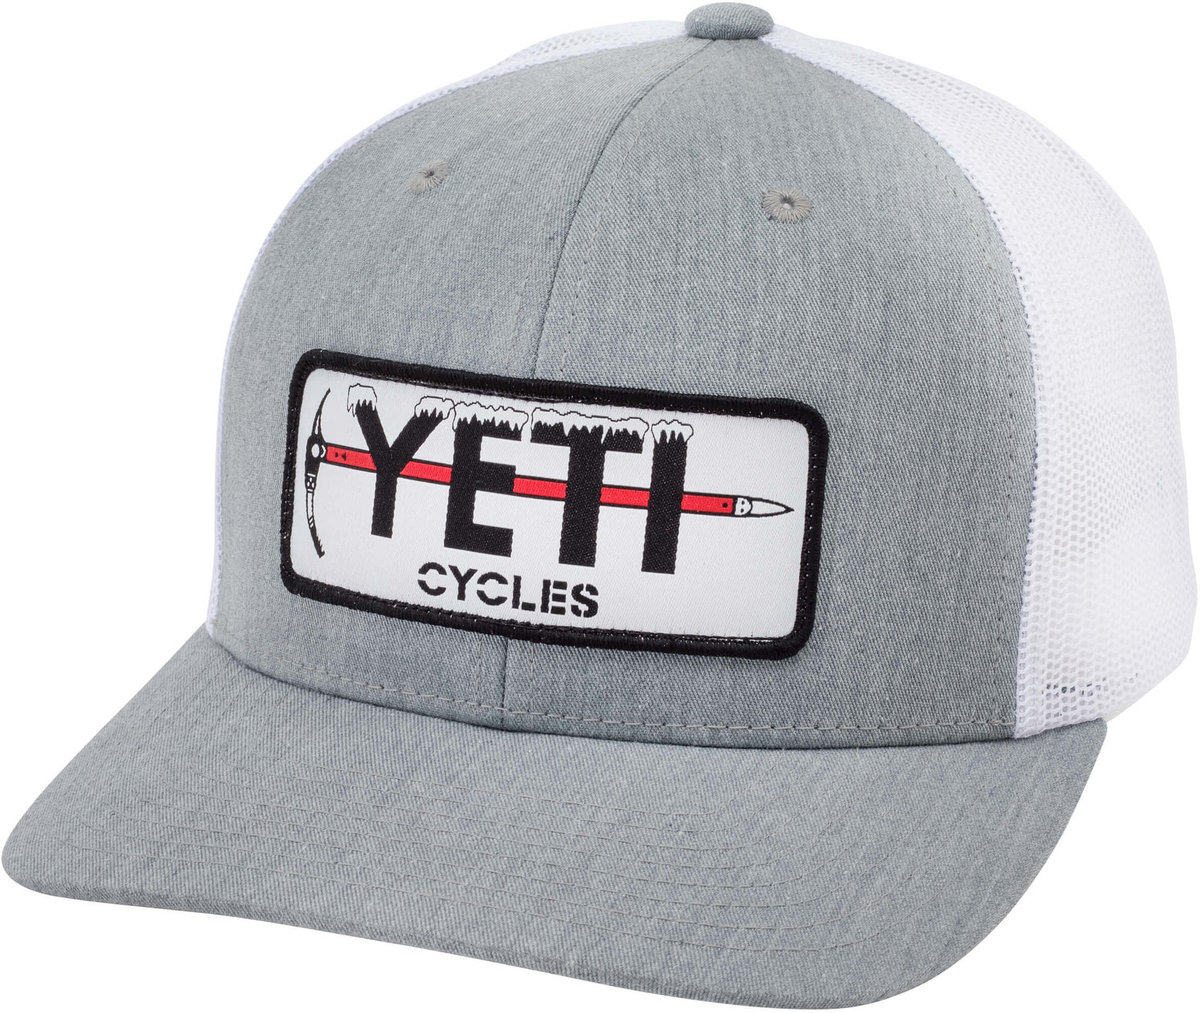 https://www.sefiles.net/images/library/zoom/yeti-cycles-ice-axe-patch-trucker-hat-snapback-373114-12.jpg